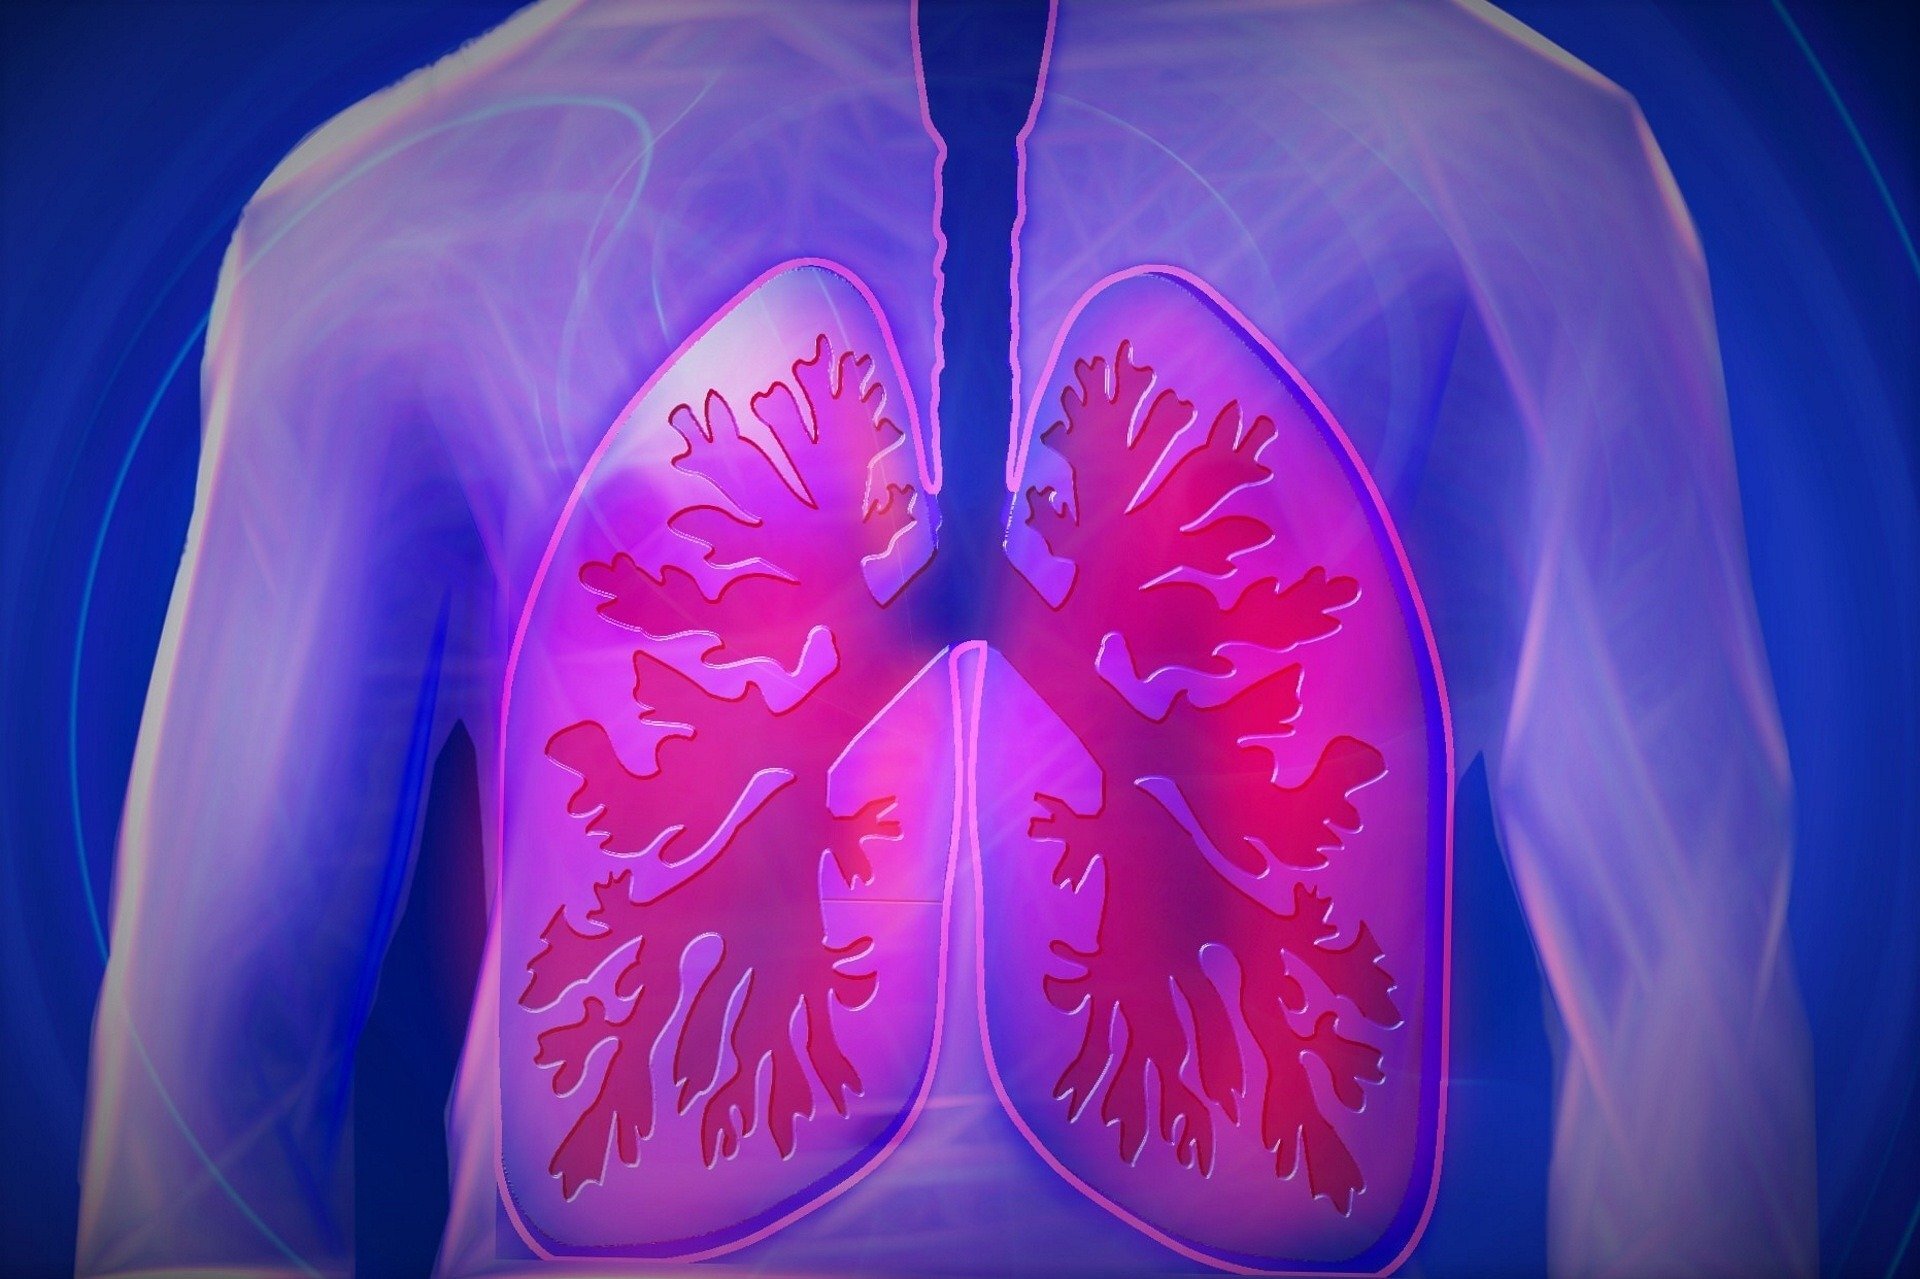 Researchers suggest air pollution be included as risk factor for patients with lung cancer and have never smoked